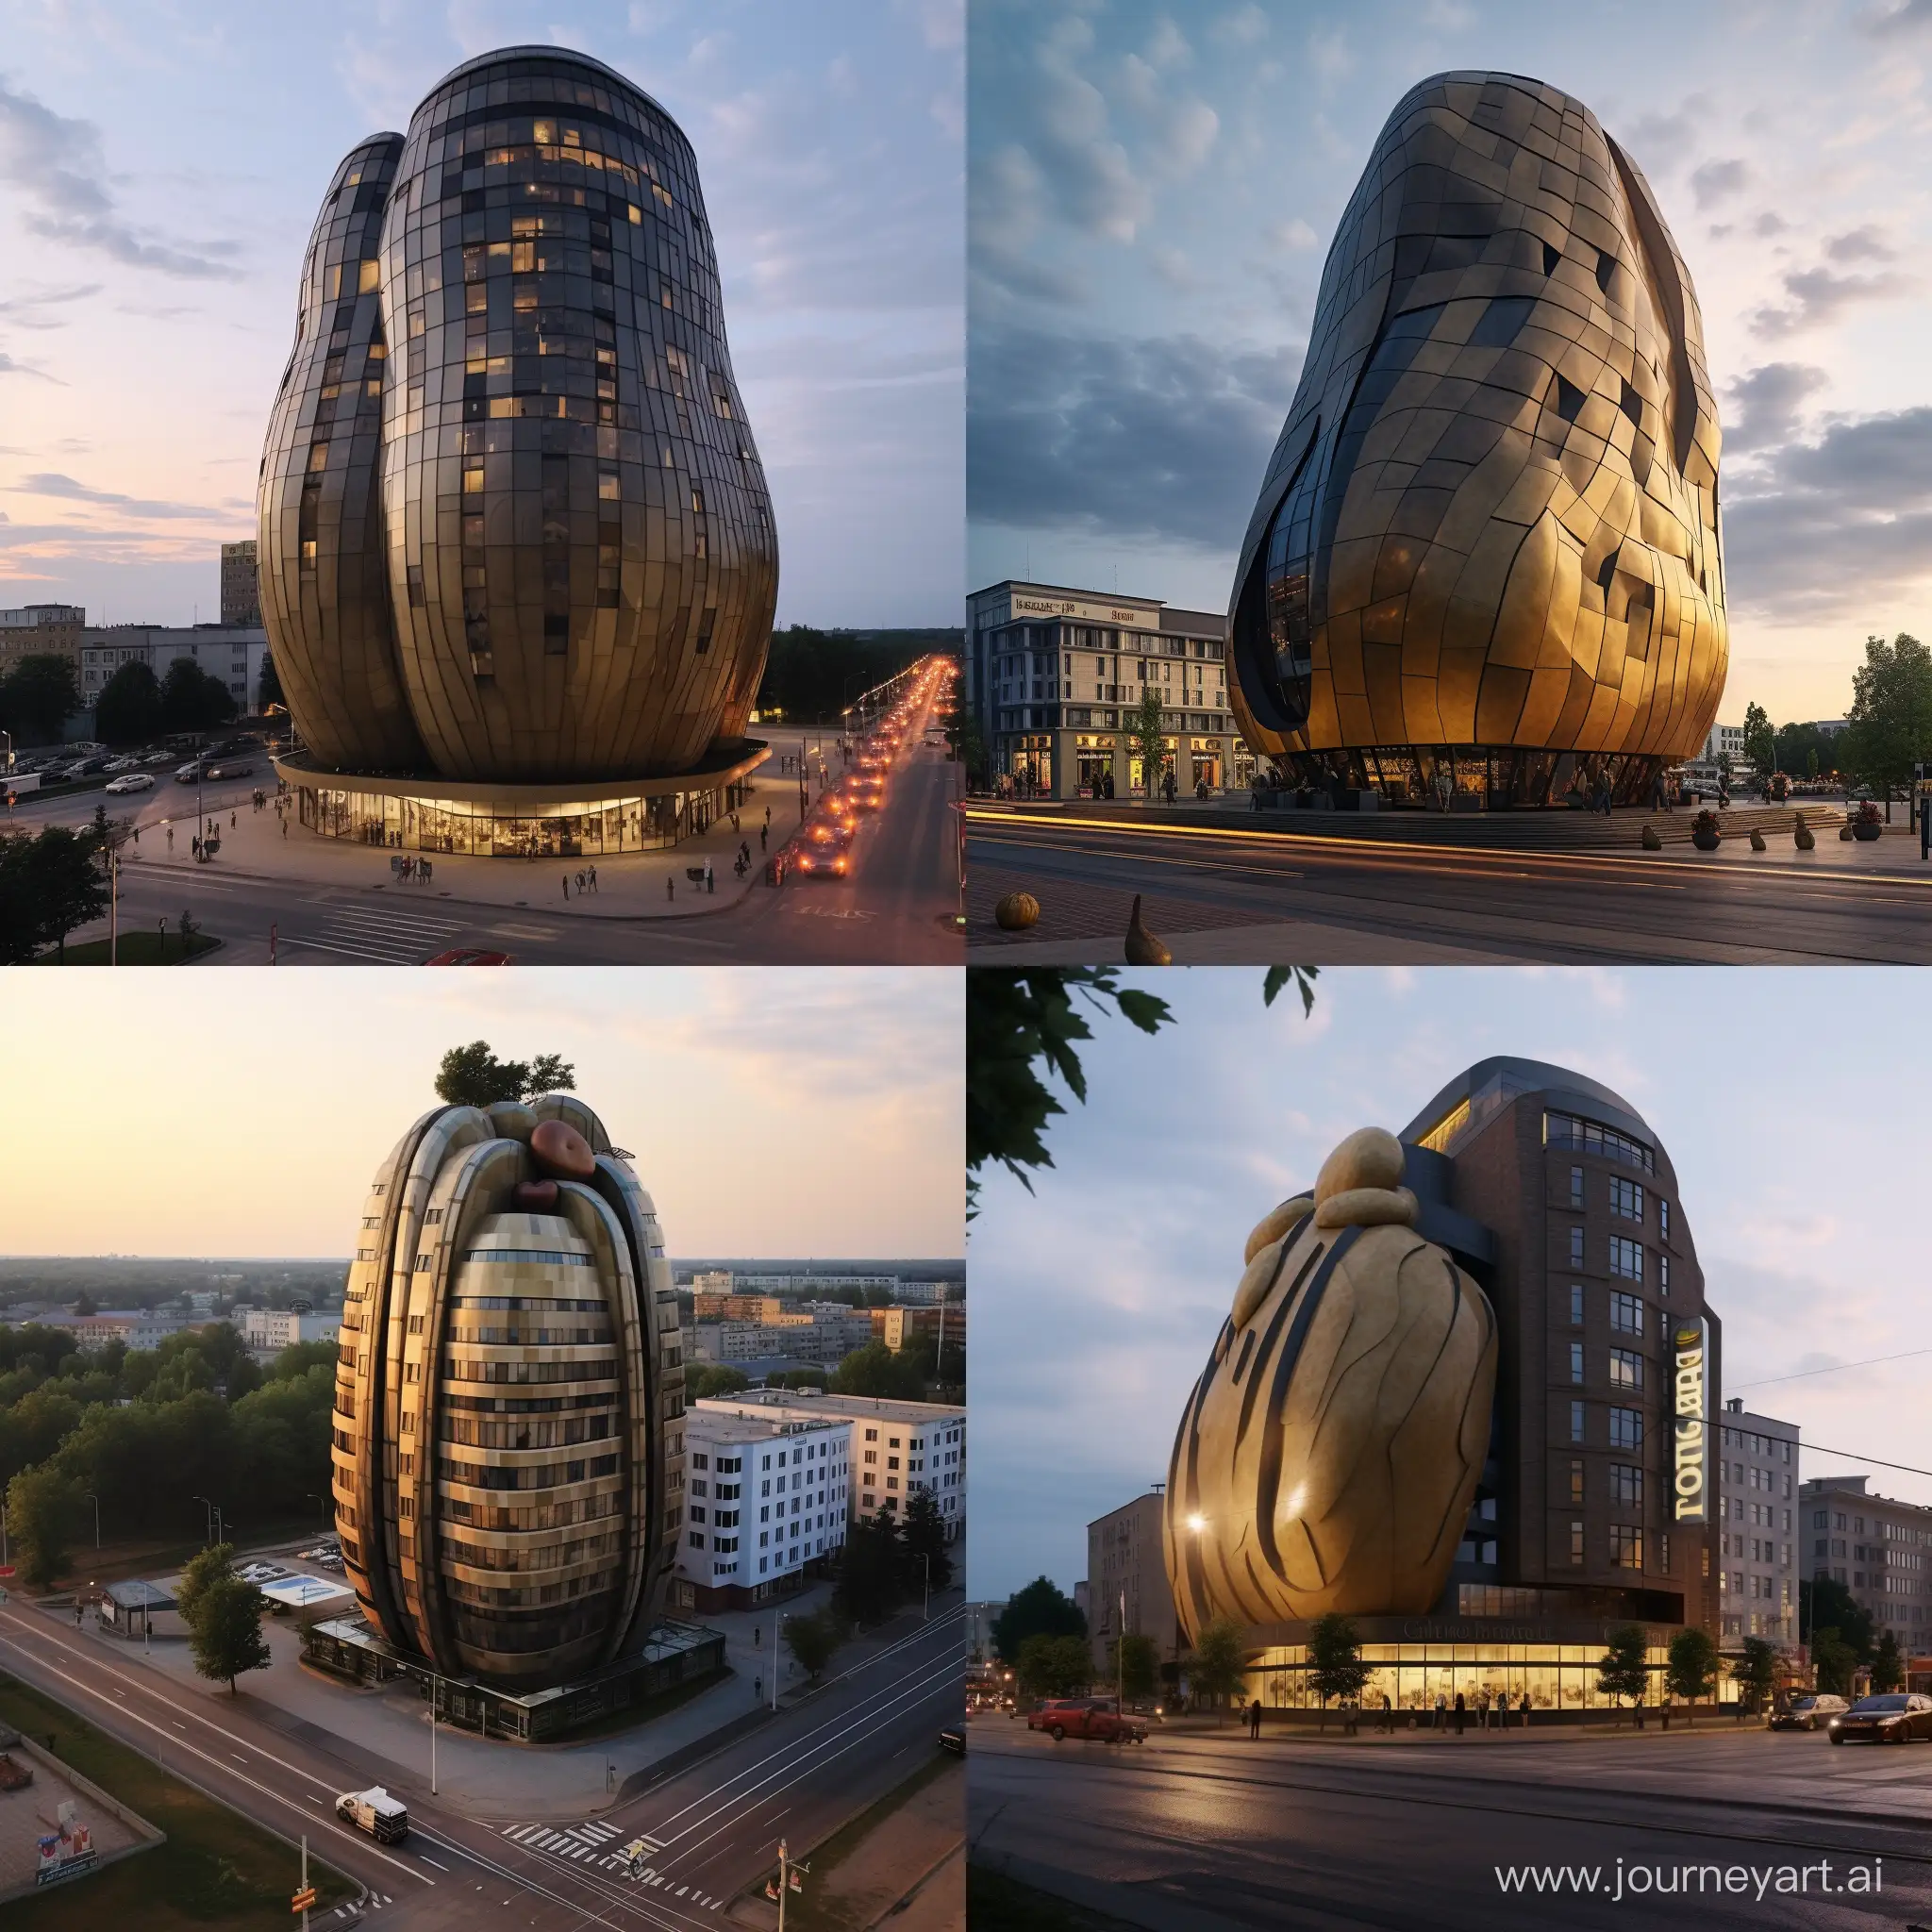 a potato-shaped building in the center of the square in Belarus is a 20-story building. Photorealism